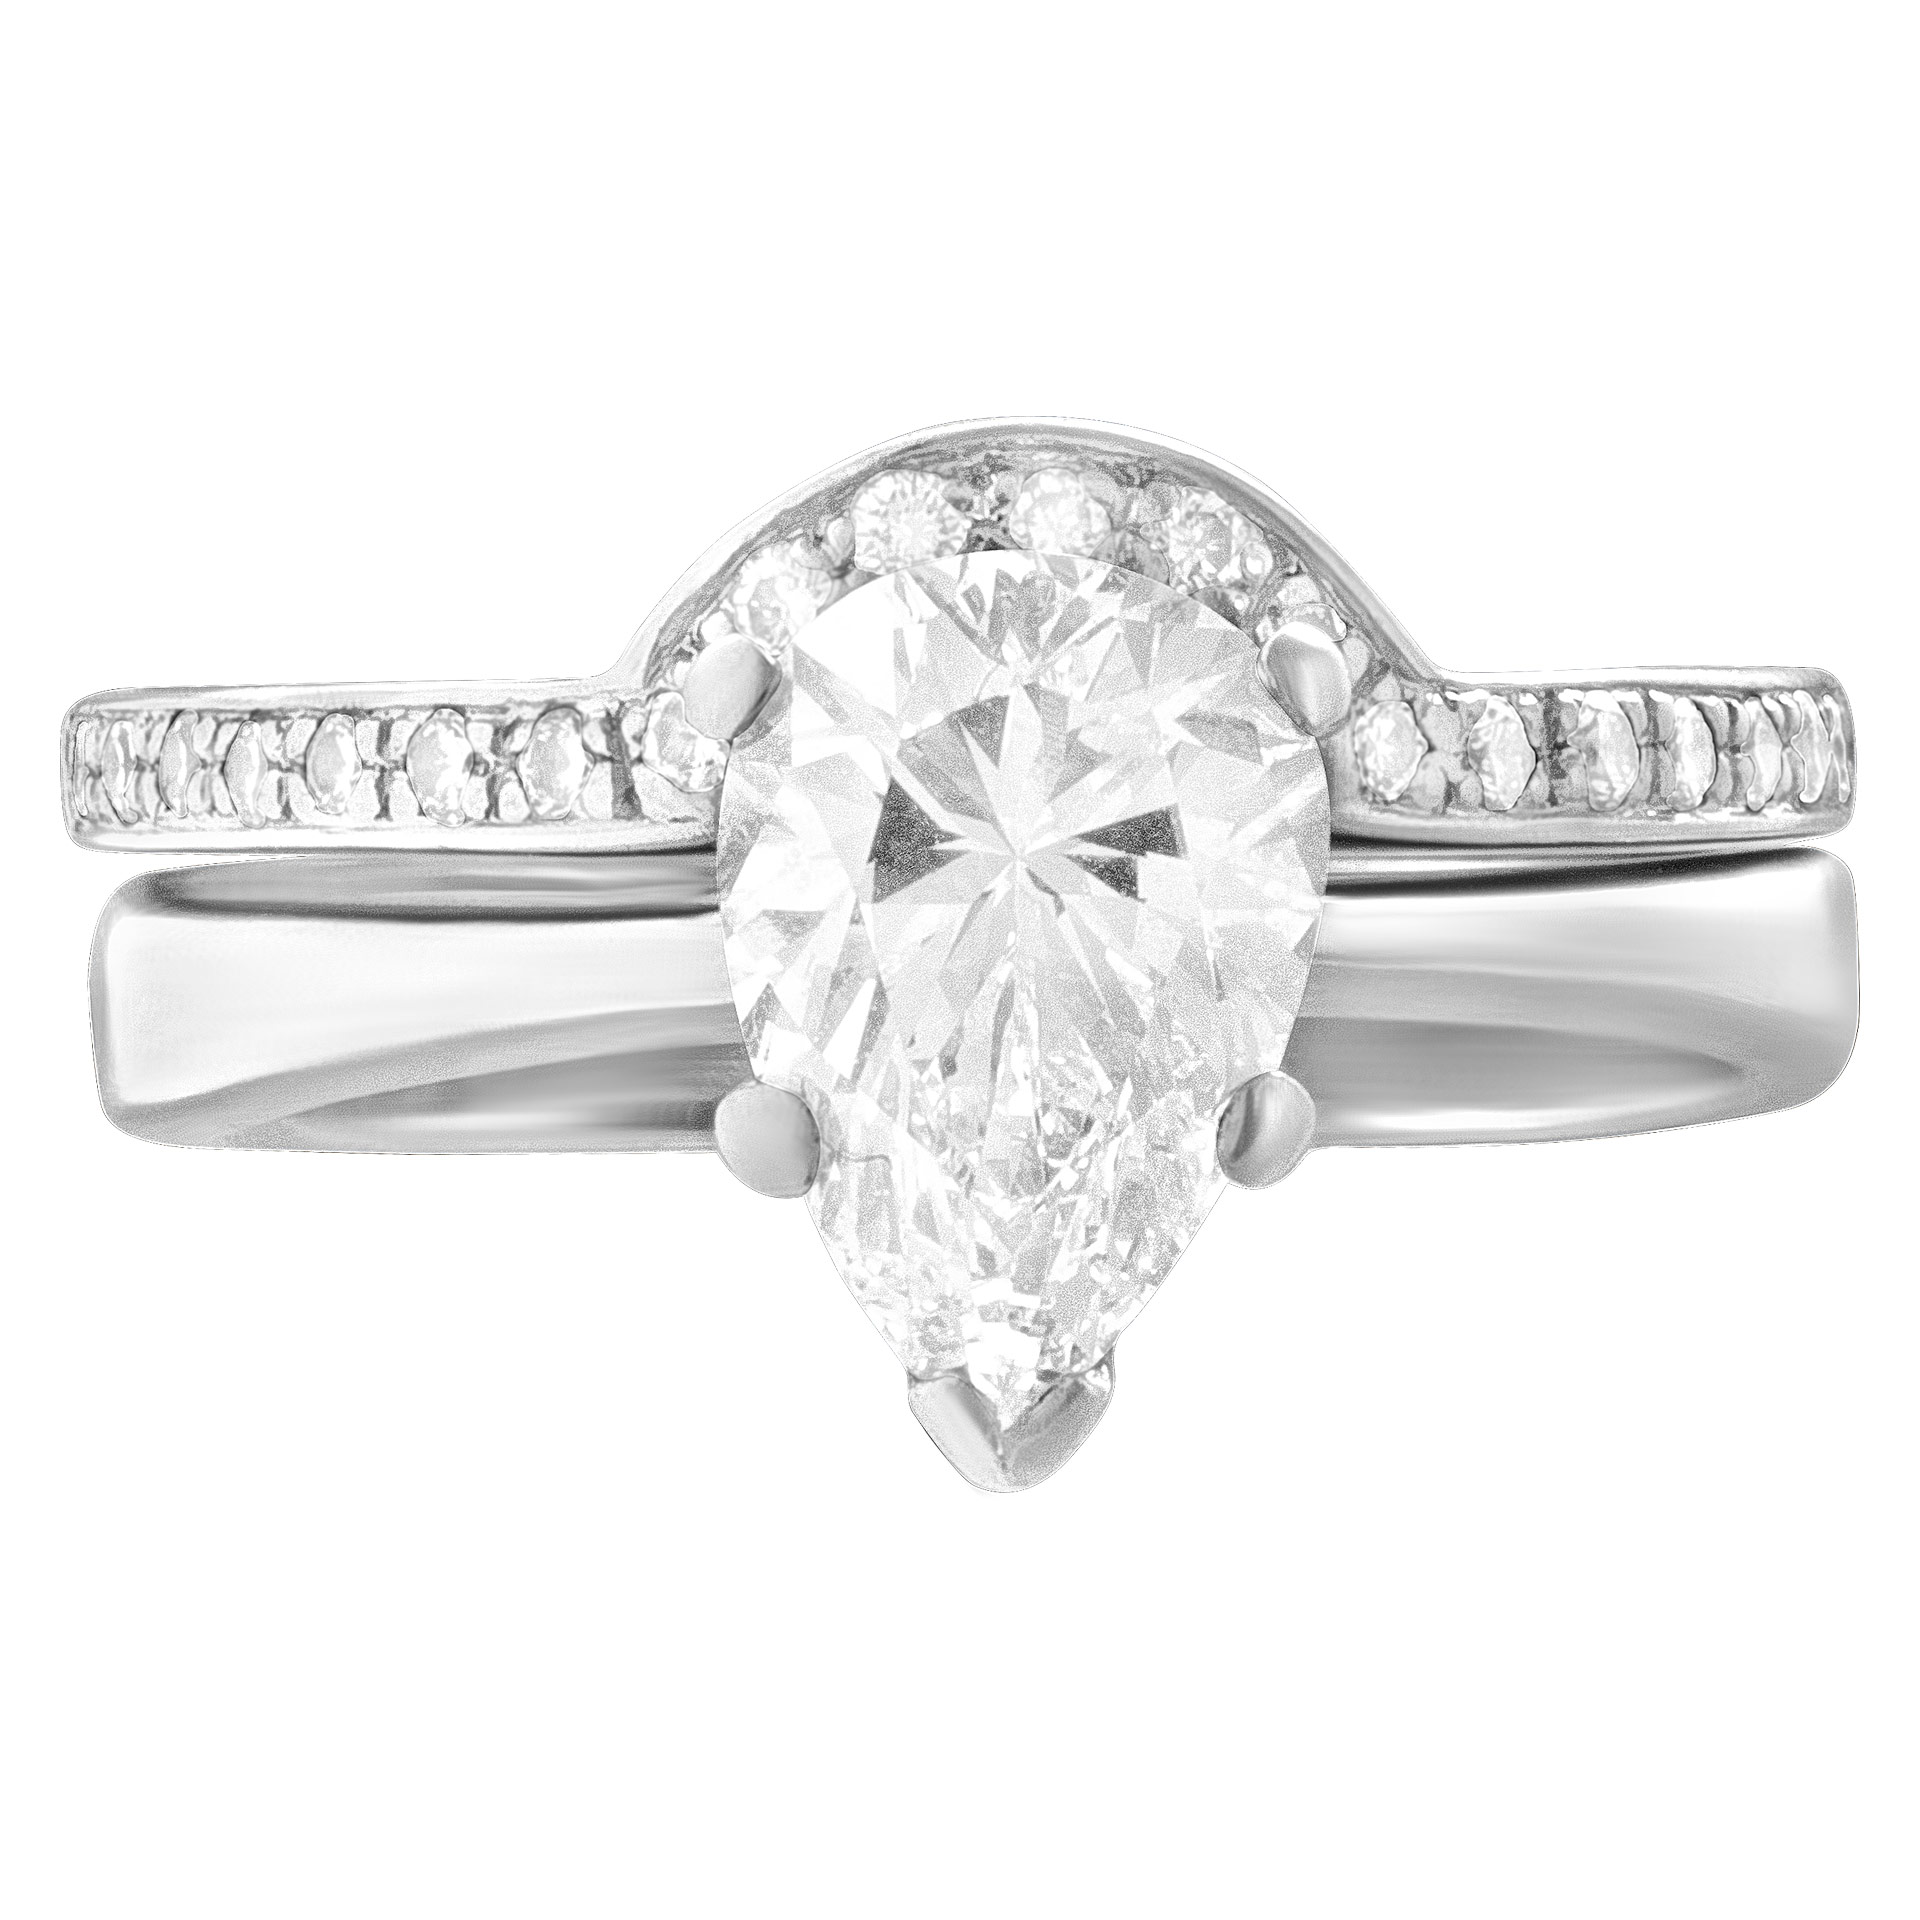 GIA Certified pear brilliant cut diamond ring 1.53 cts. ( D color, VS2 clarity ) set in 14k white gold